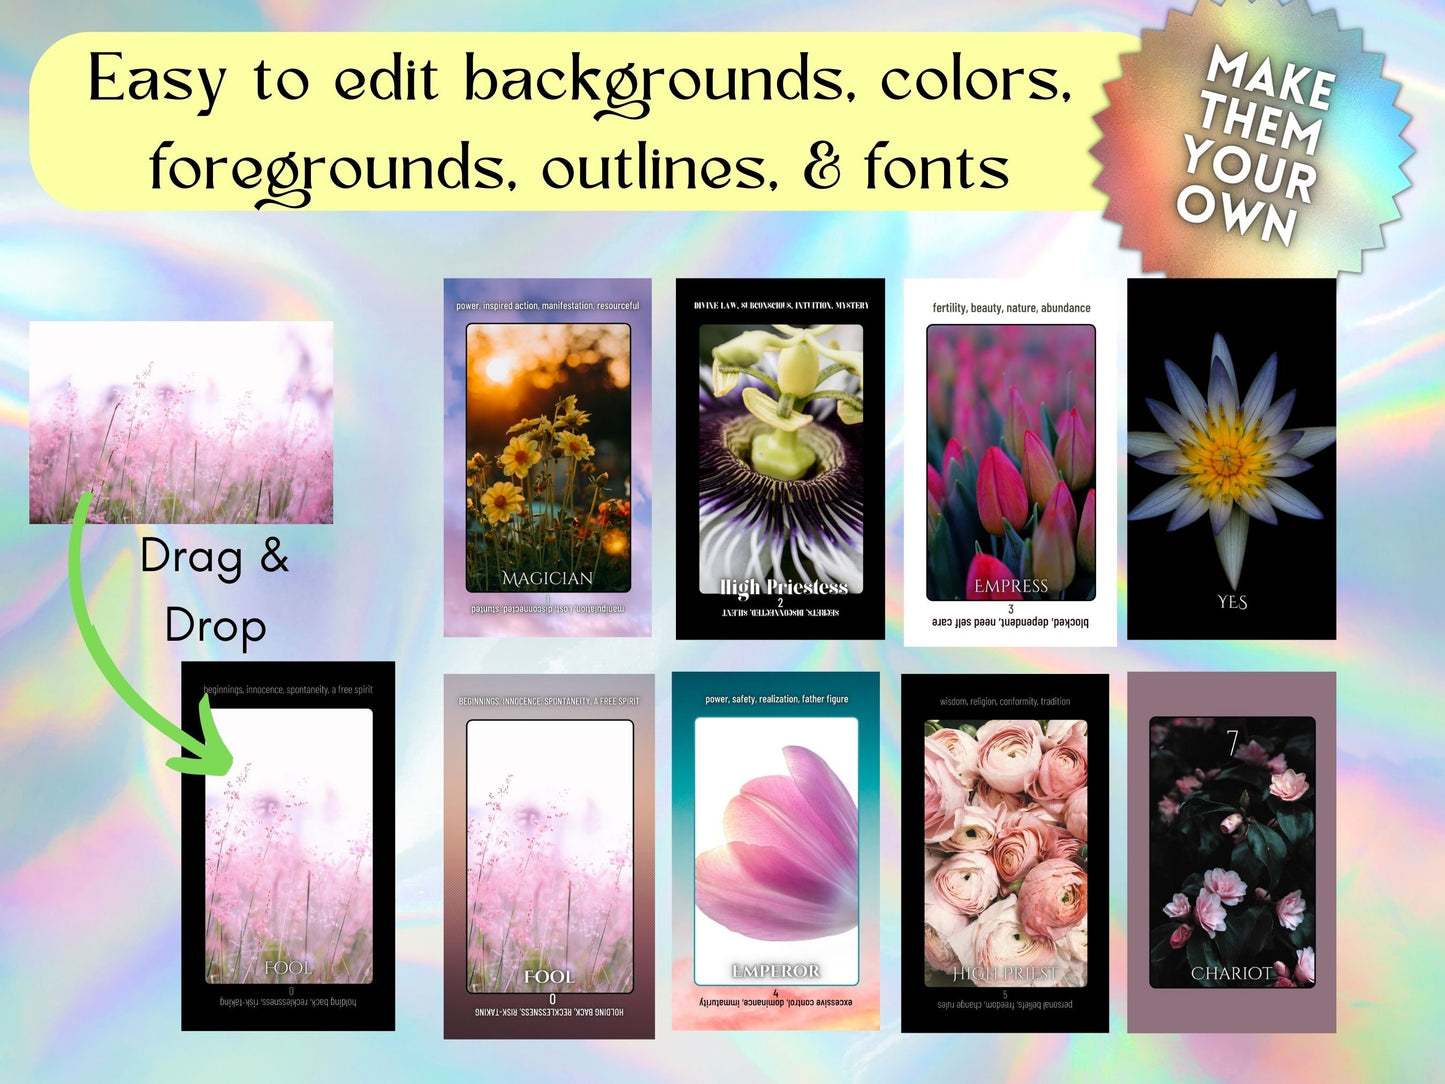 Tarot Deck Template for Canva, Tarot, Oracle, Divination Card Deck Template with Keywords and without Keywords, use with Canva